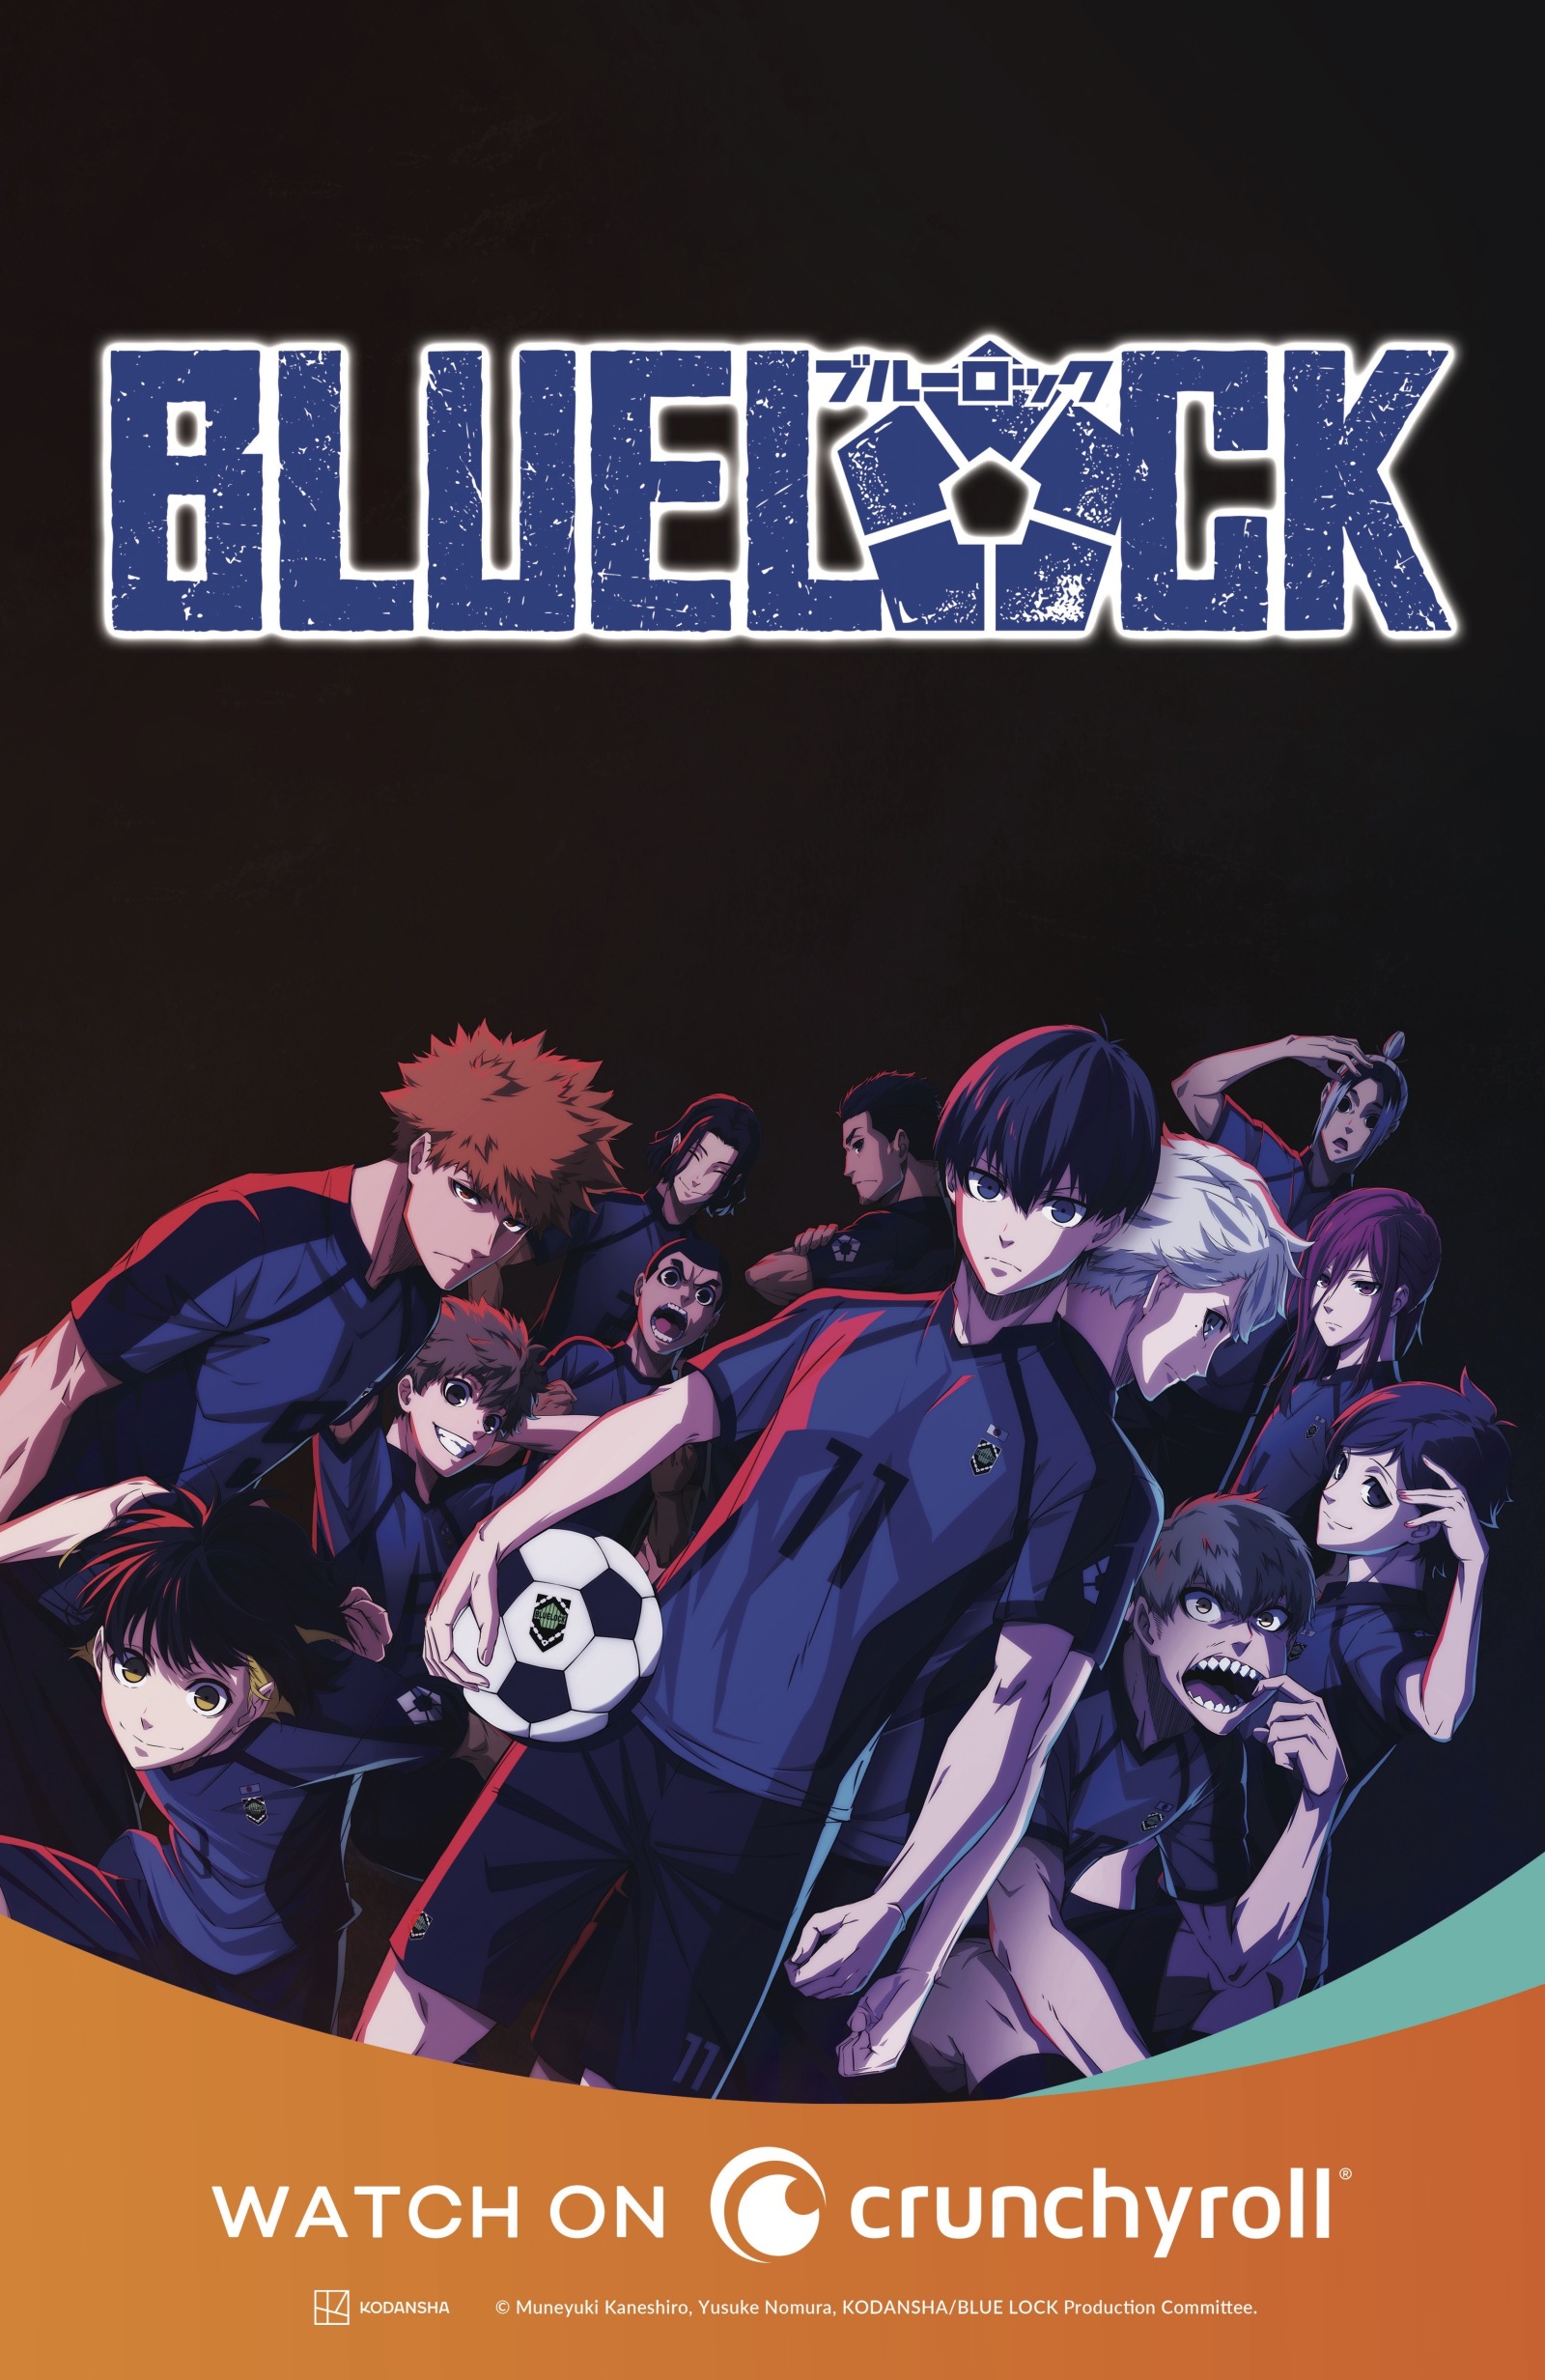 Blue Lock Hypes Midseason Return With New Poster